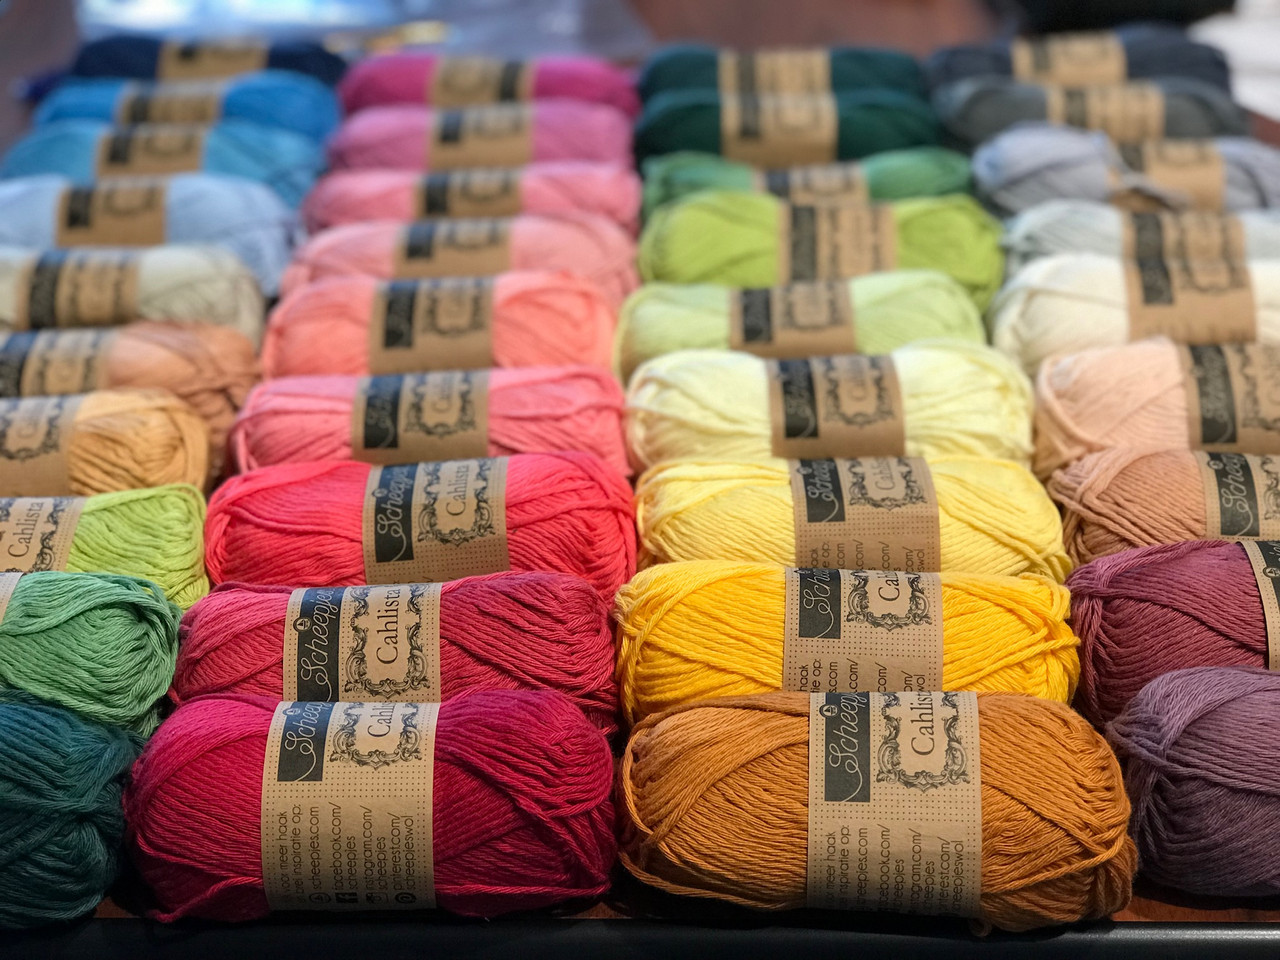 Scheepjes Yarn & Wool, FREE Delivery Over £30